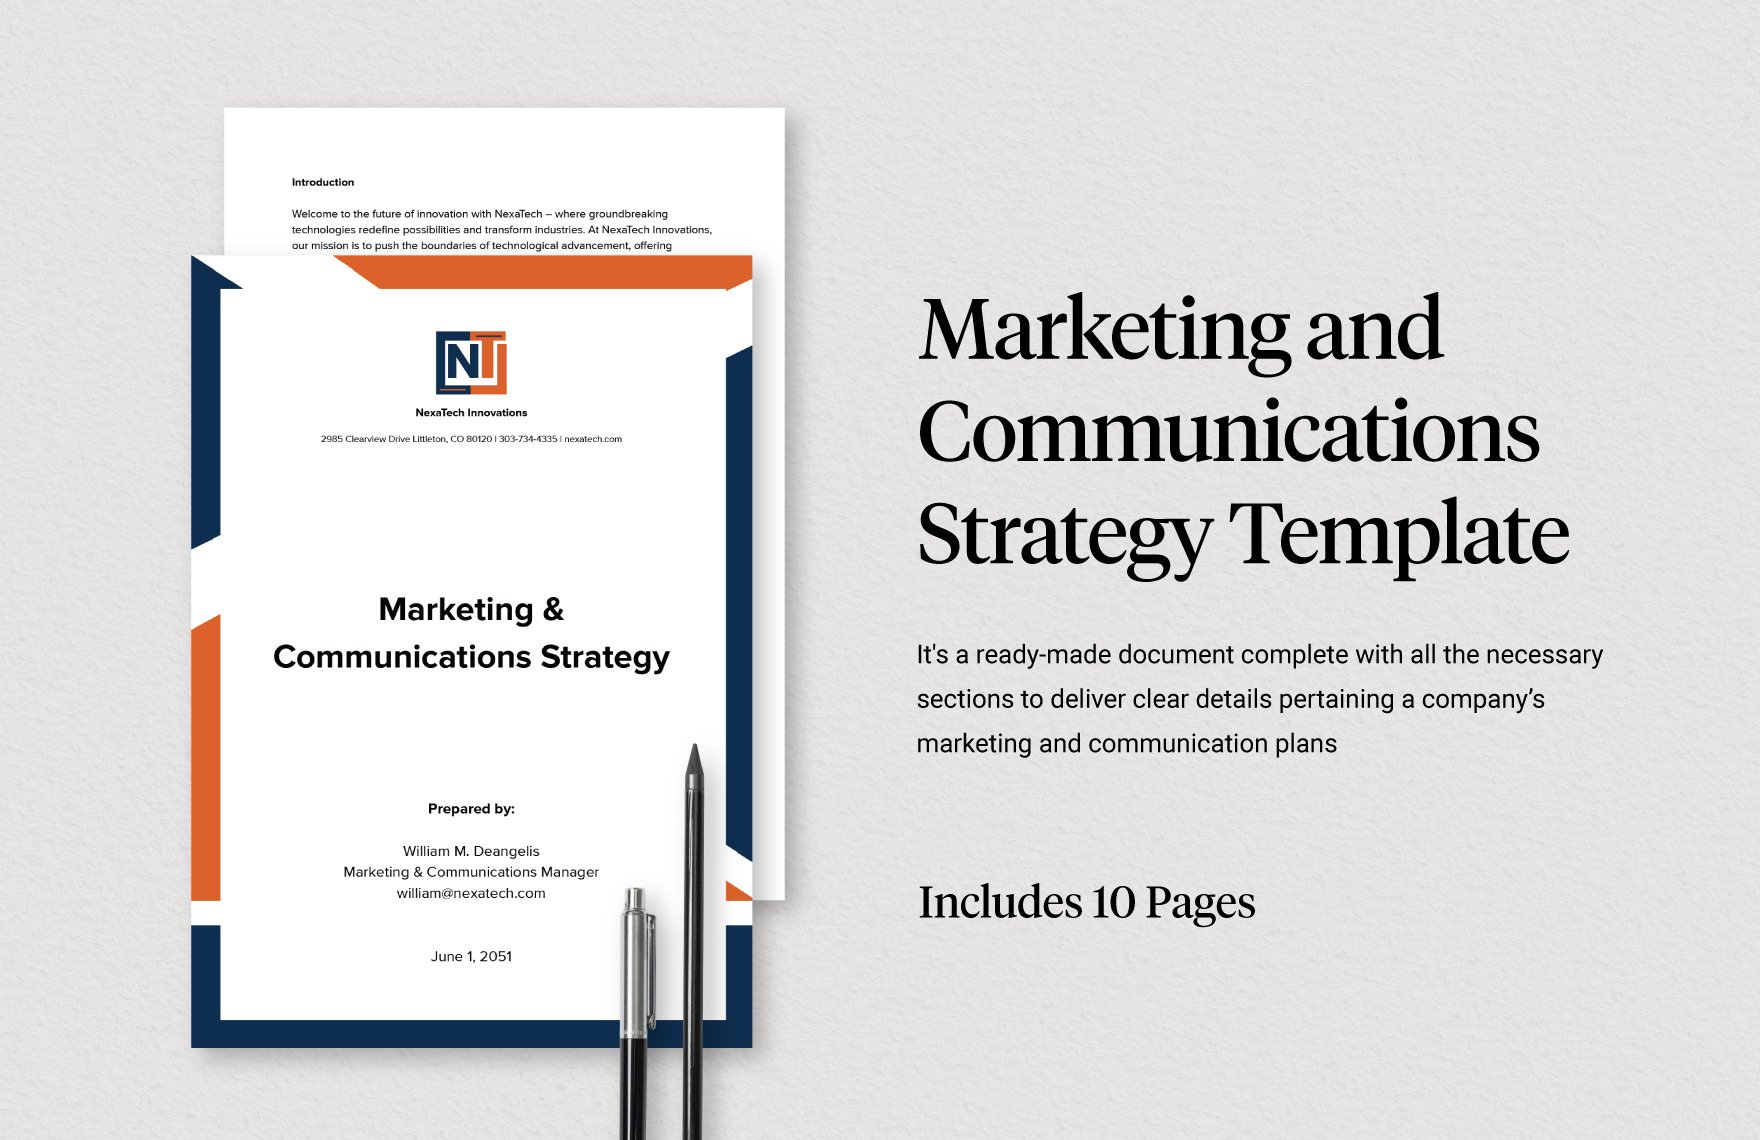 Marketing and Communications Strategy Template